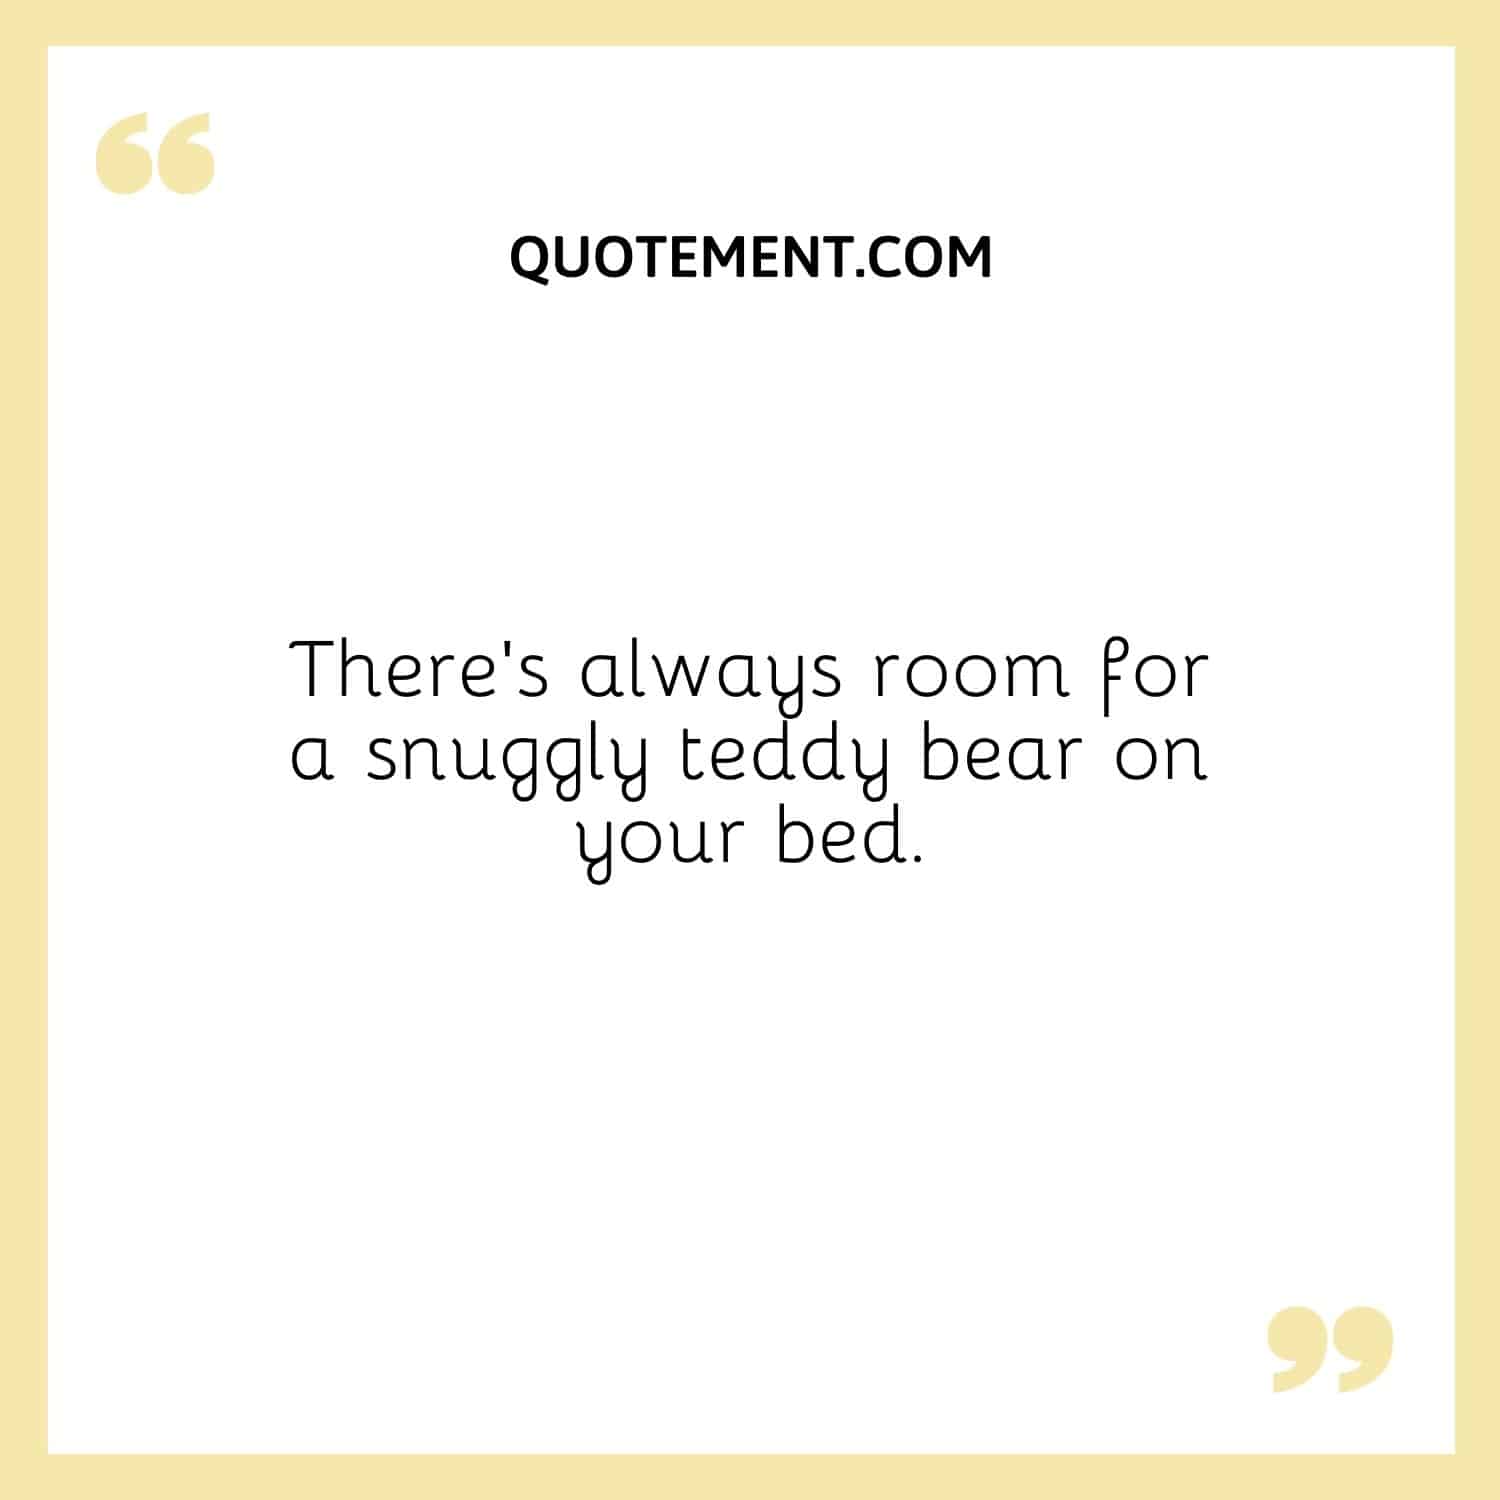 There’s always room for a snuggly teddy